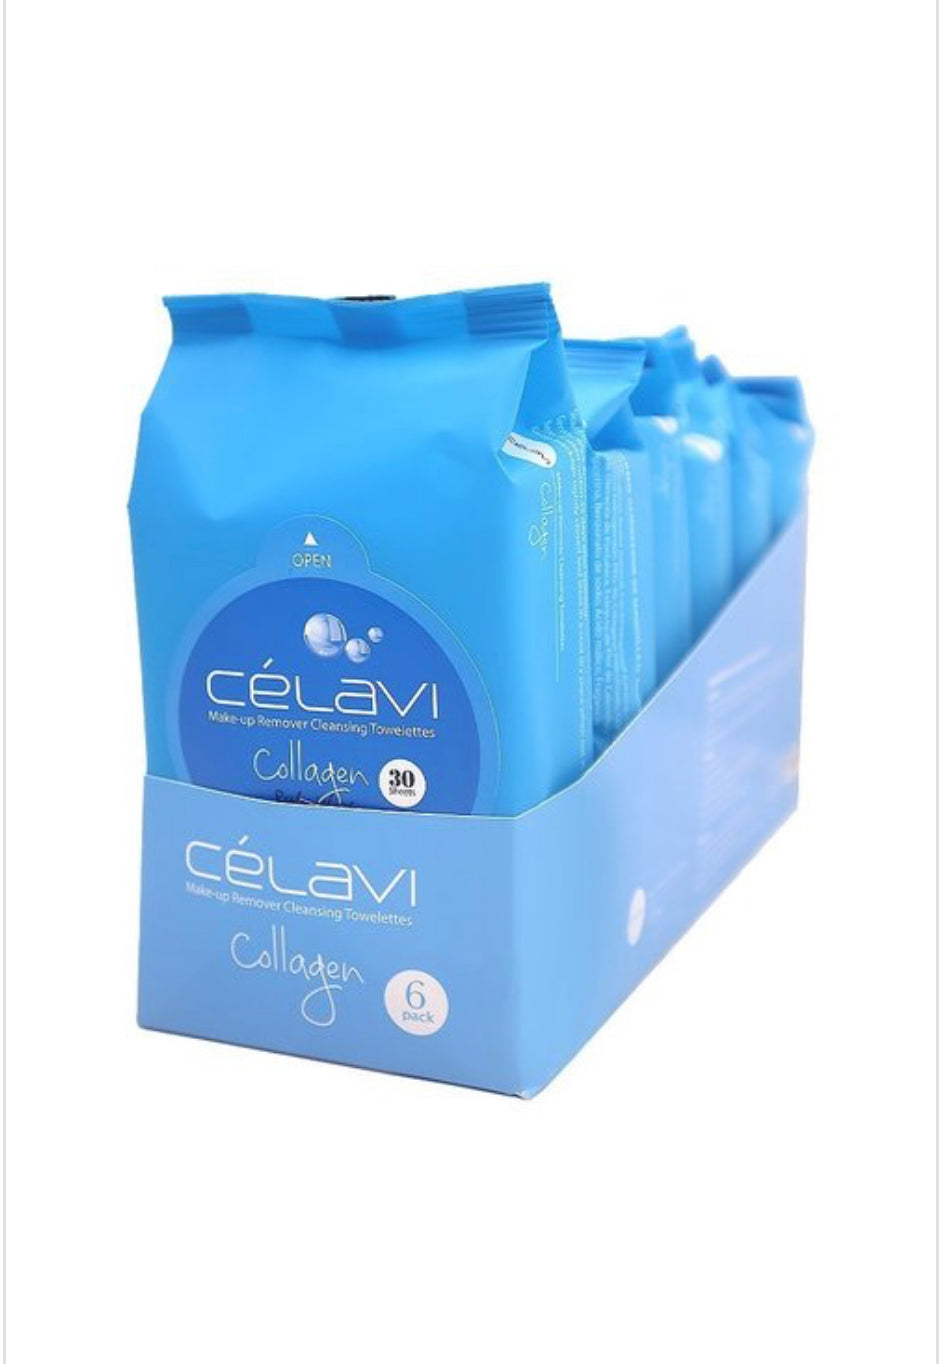 Collagen Cleansing Wipes